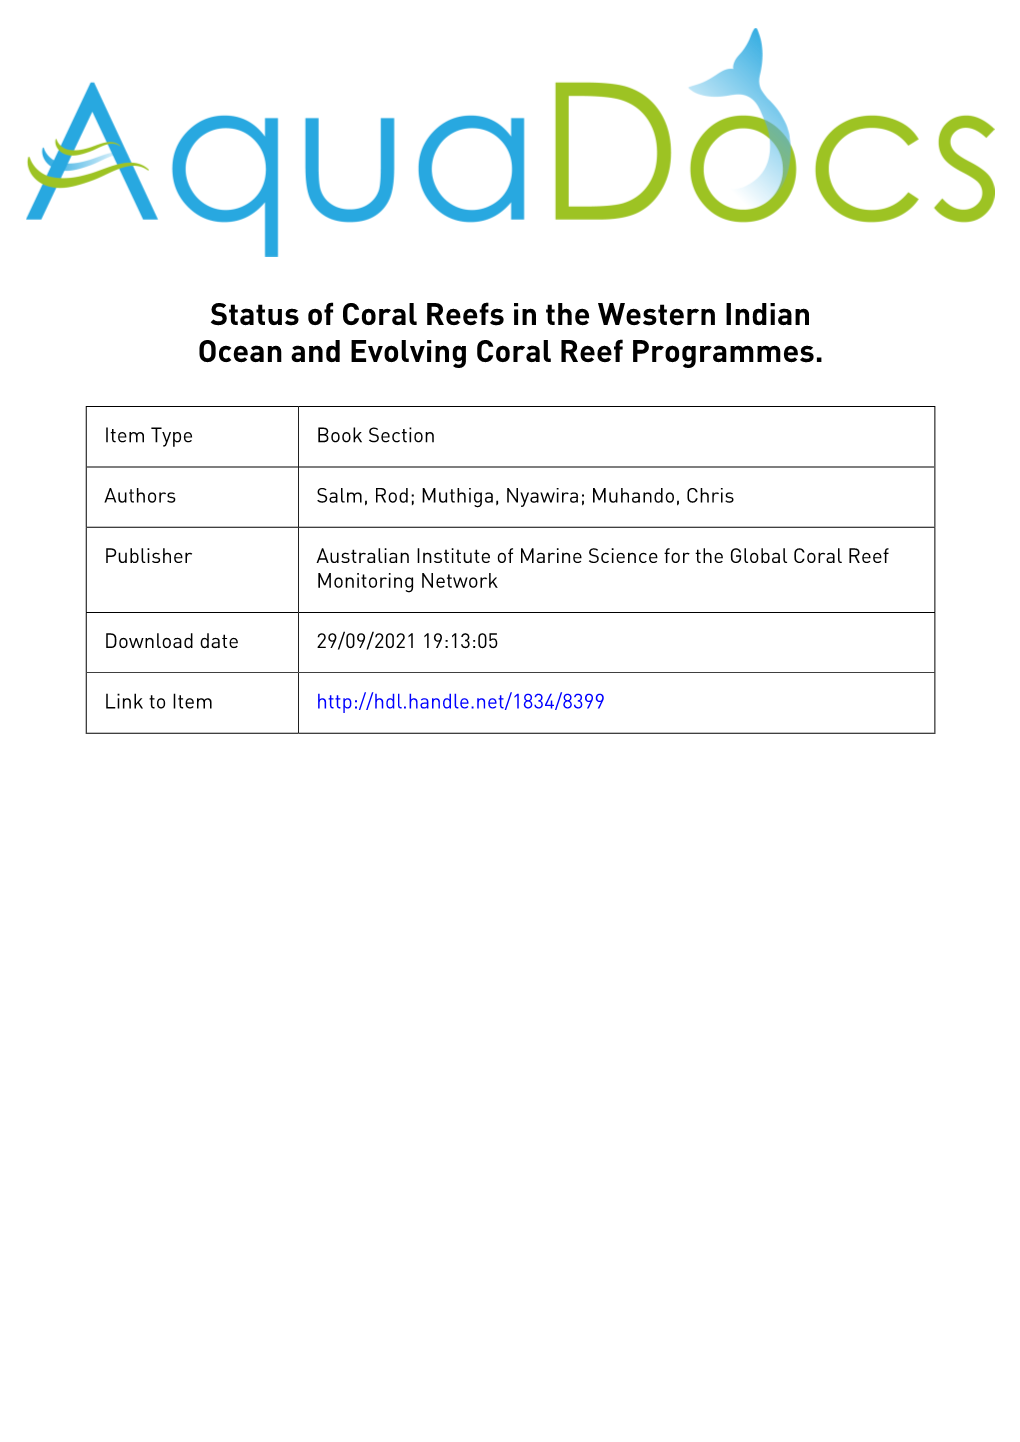 4. Status of Coral Reefs in the Western Indian Ocean and Evolving Coral Reef Programmes